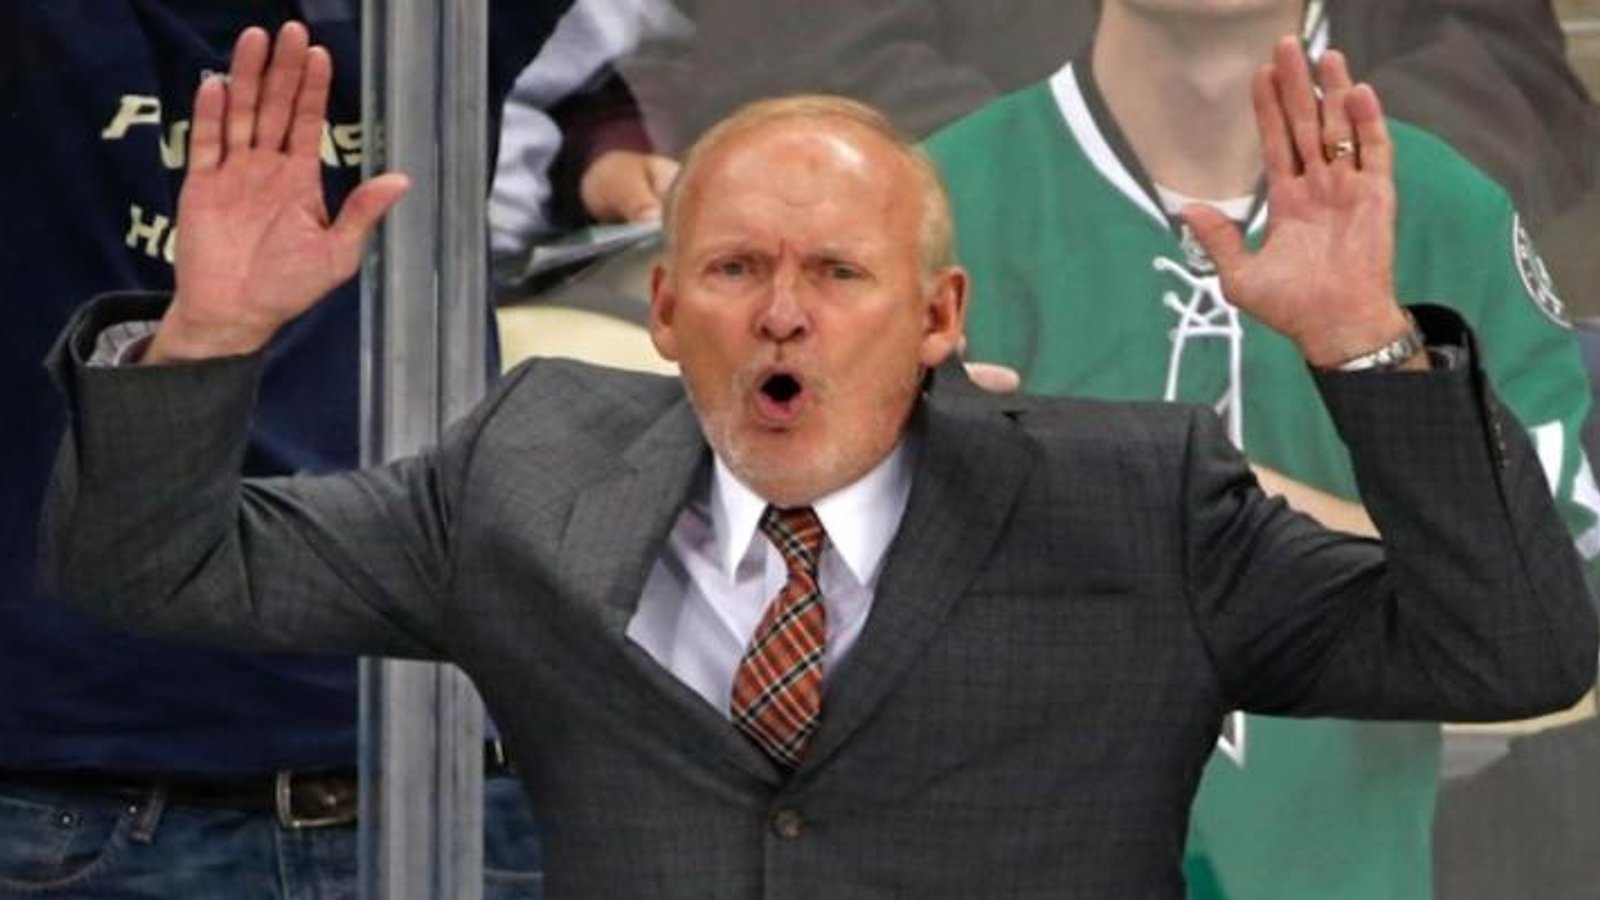 Head coach accuses player for embellishment, after his player gets ejected.